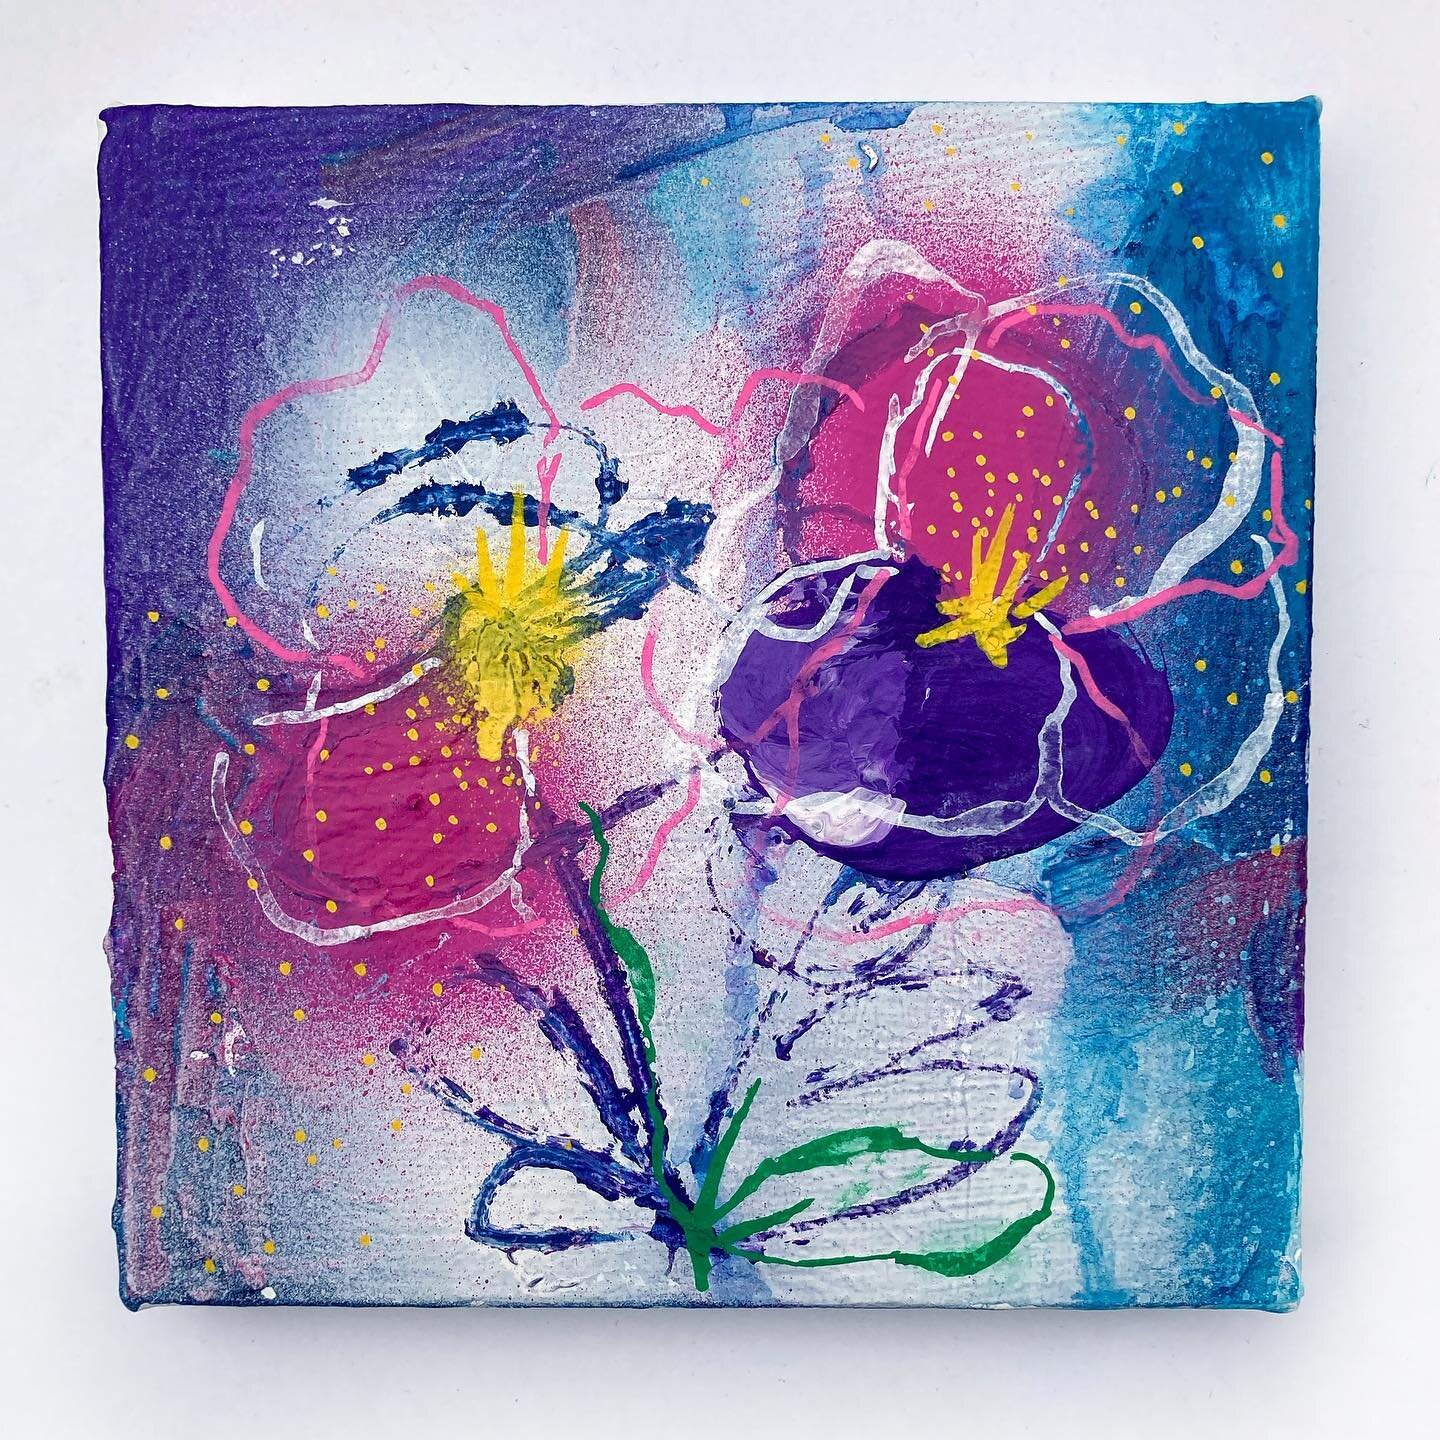 I&rsquo;m back from NH today, and sharing some mini #rageflorals that I finished right before we left. These are all 6x6&rdquo; mixed media on stretched canvas. (Swipe through to see all 4)

They might be mini, but they were fueled by the same rage a